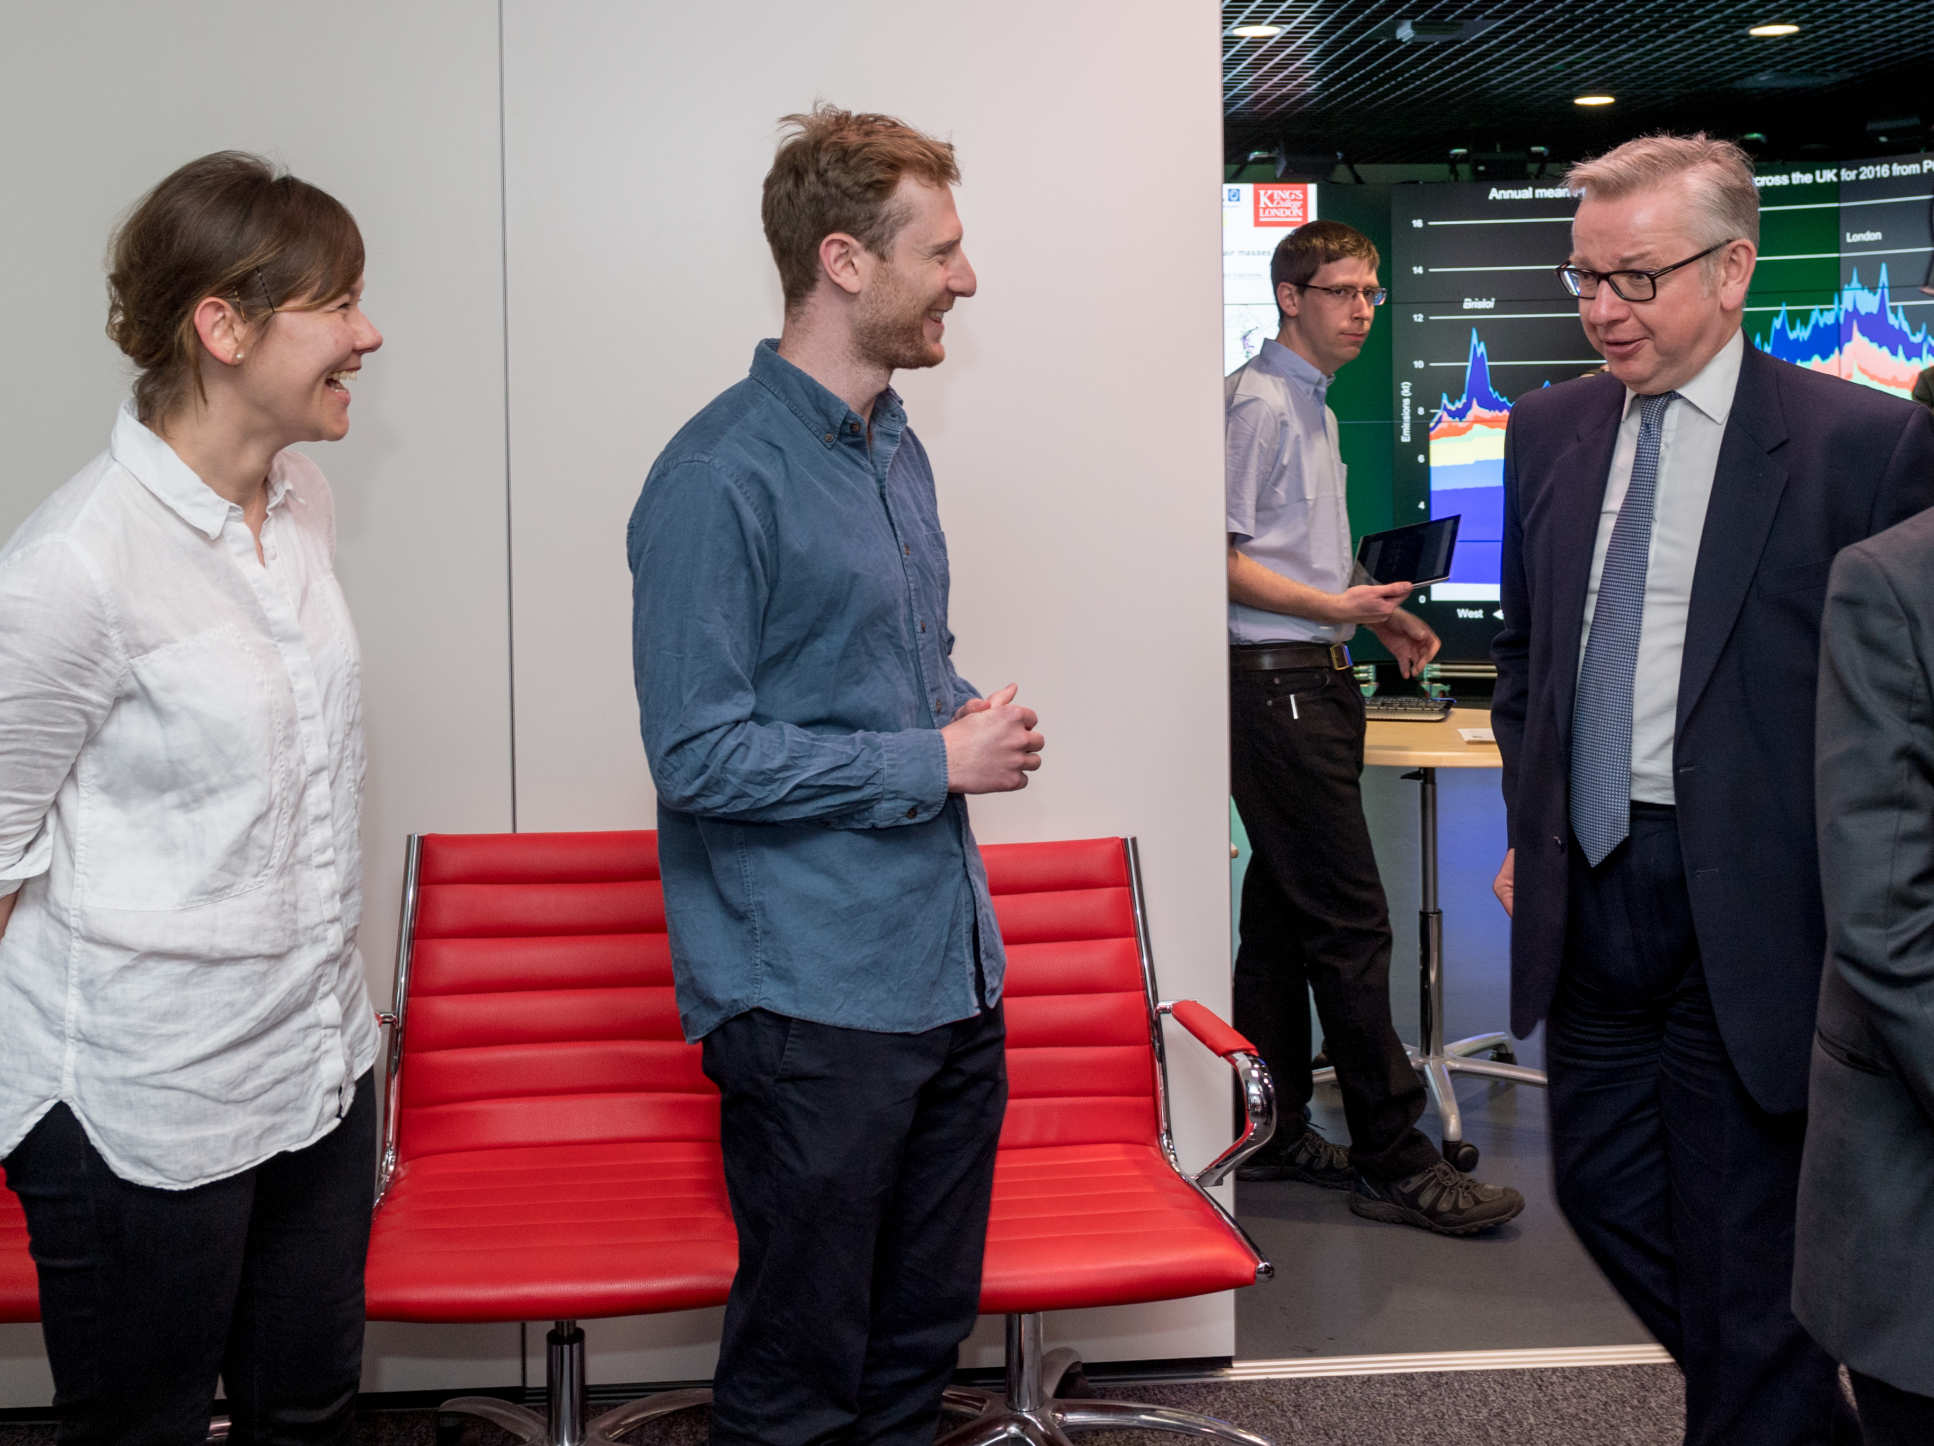 Mr Gove met some of Imperial's student innovators